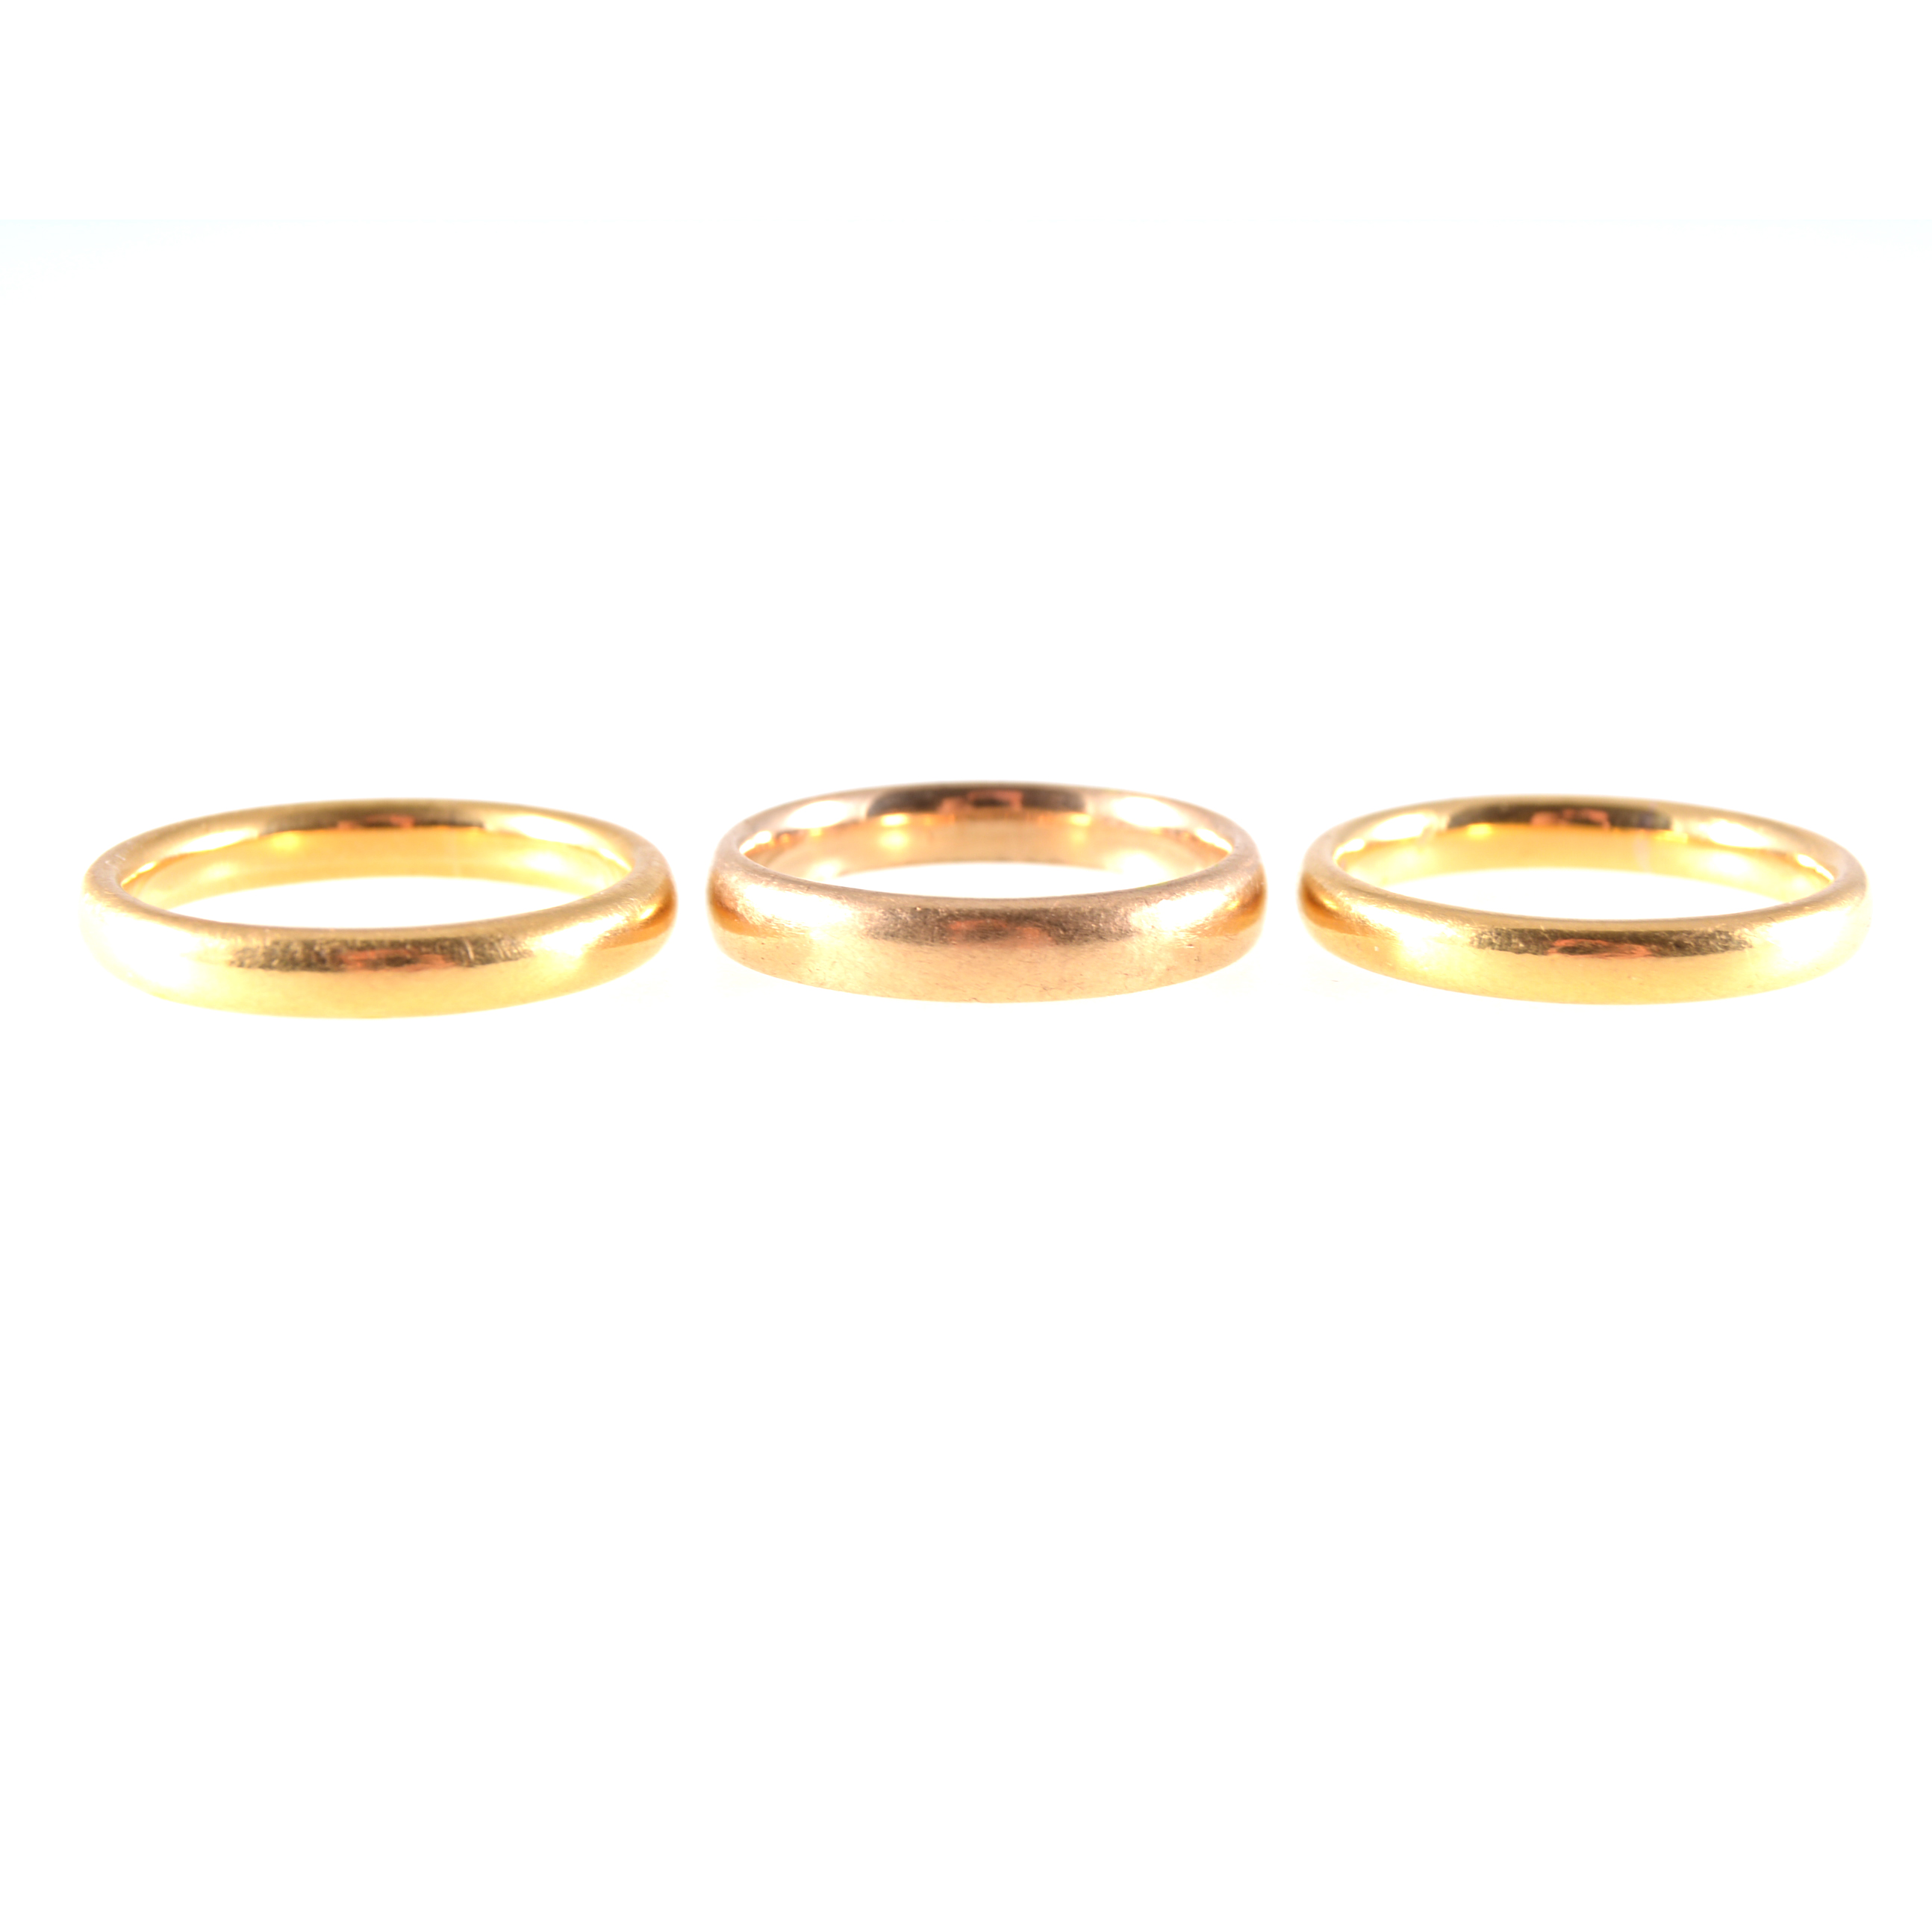 Three 22 carat yellow gold wedding bands, 3m and 3,5mm wide, plain polished finish,